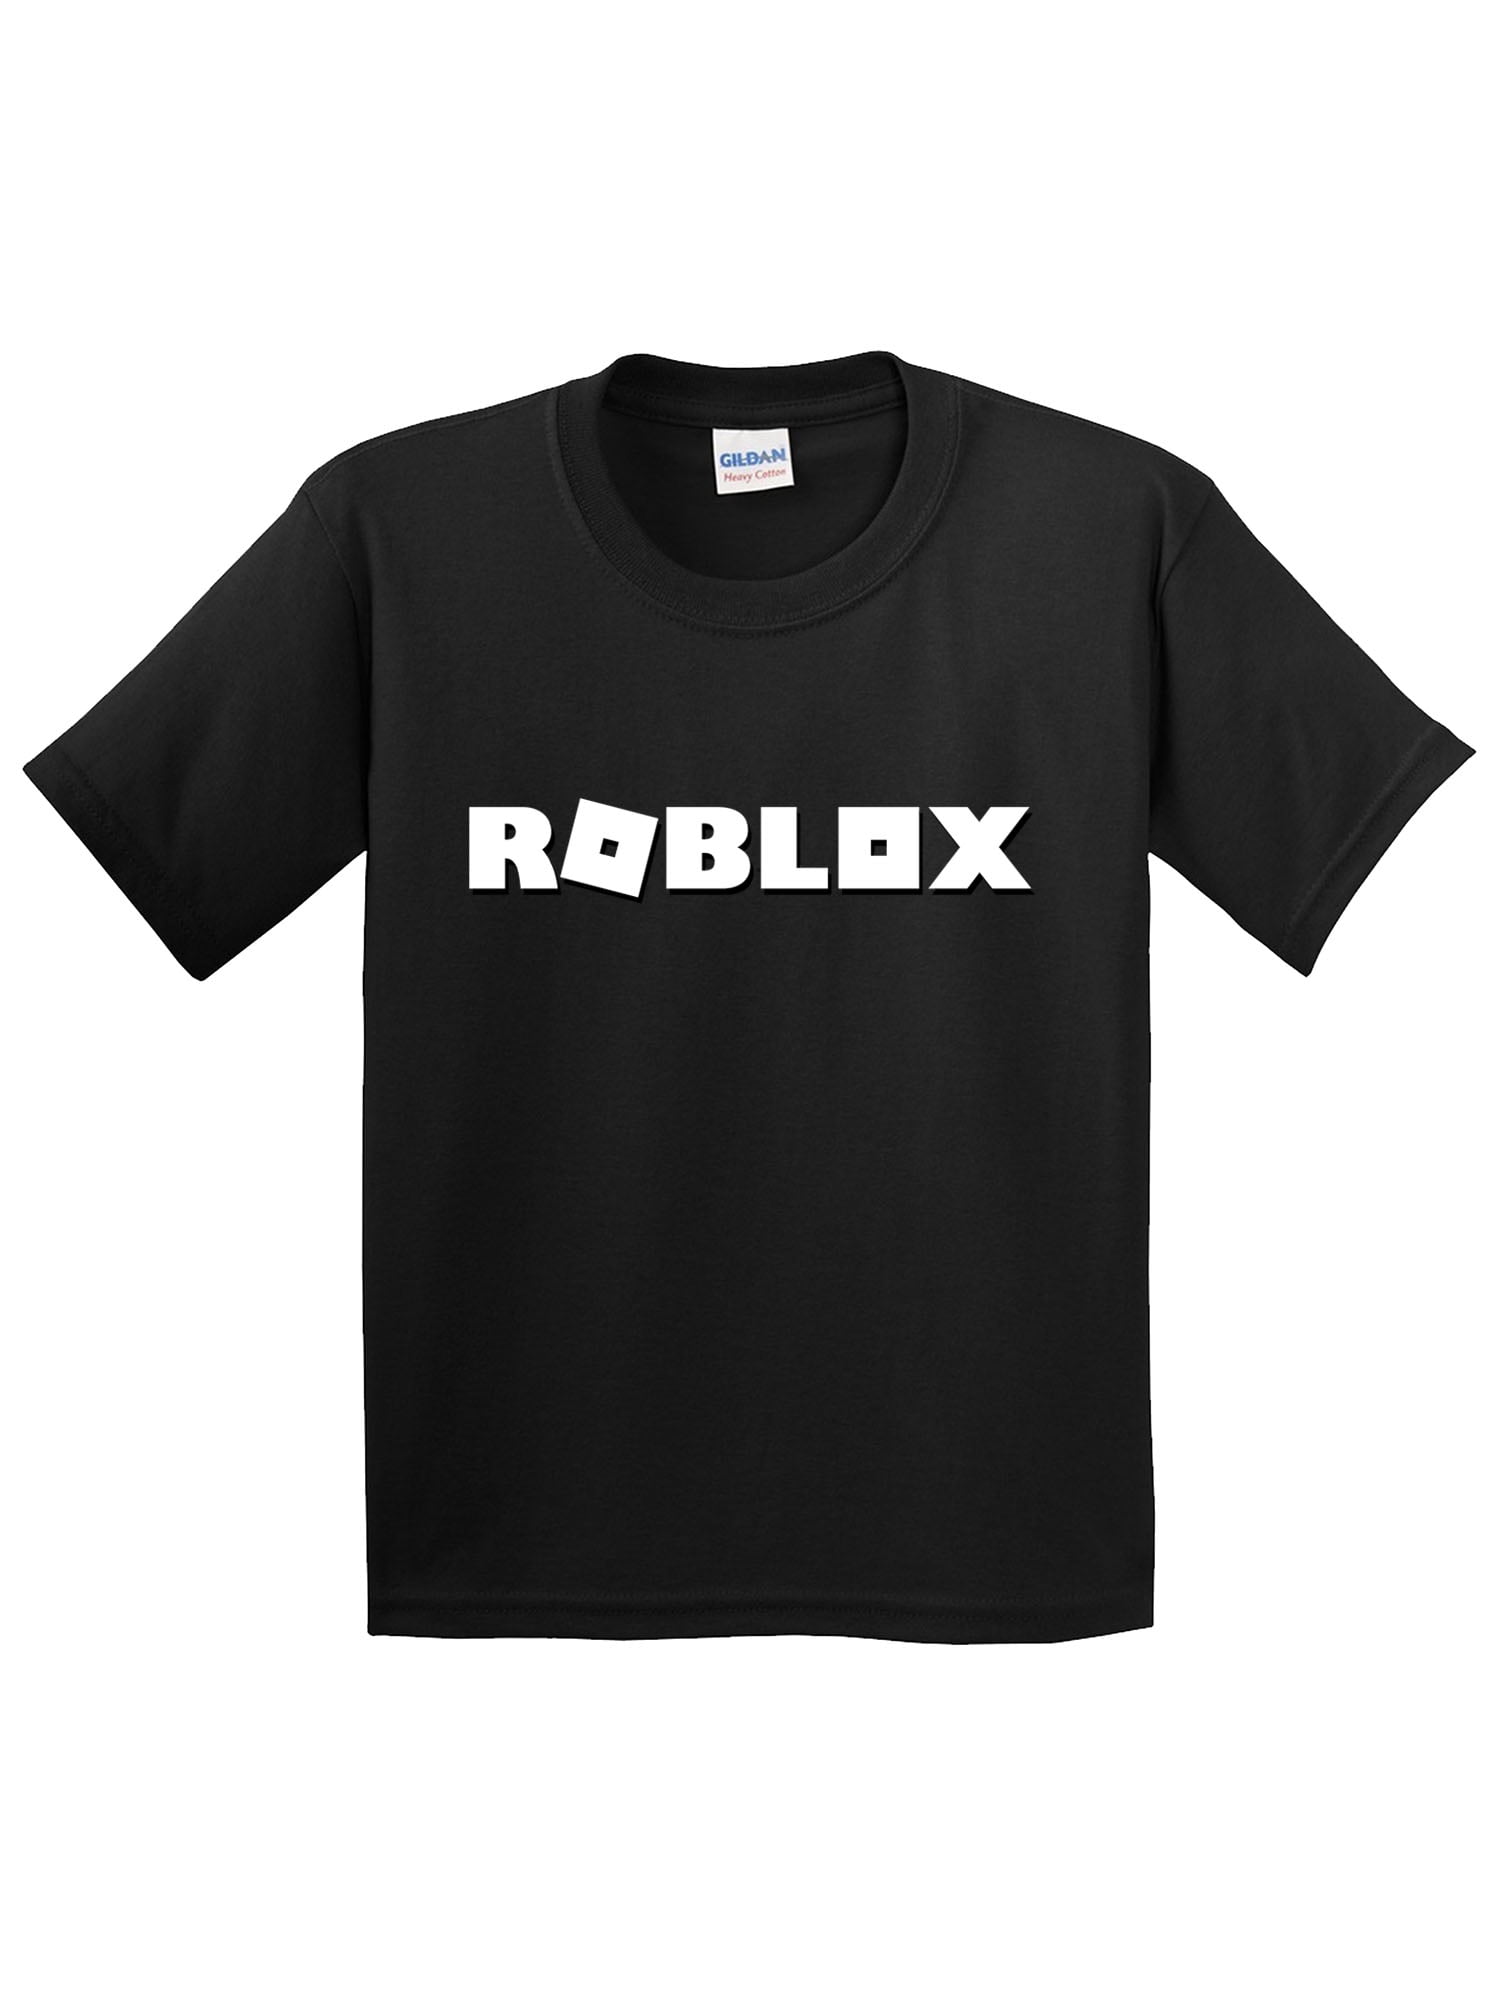 How To Make Your Own Roblox Shirt Polo T Shirts Outlet Official Online Shop